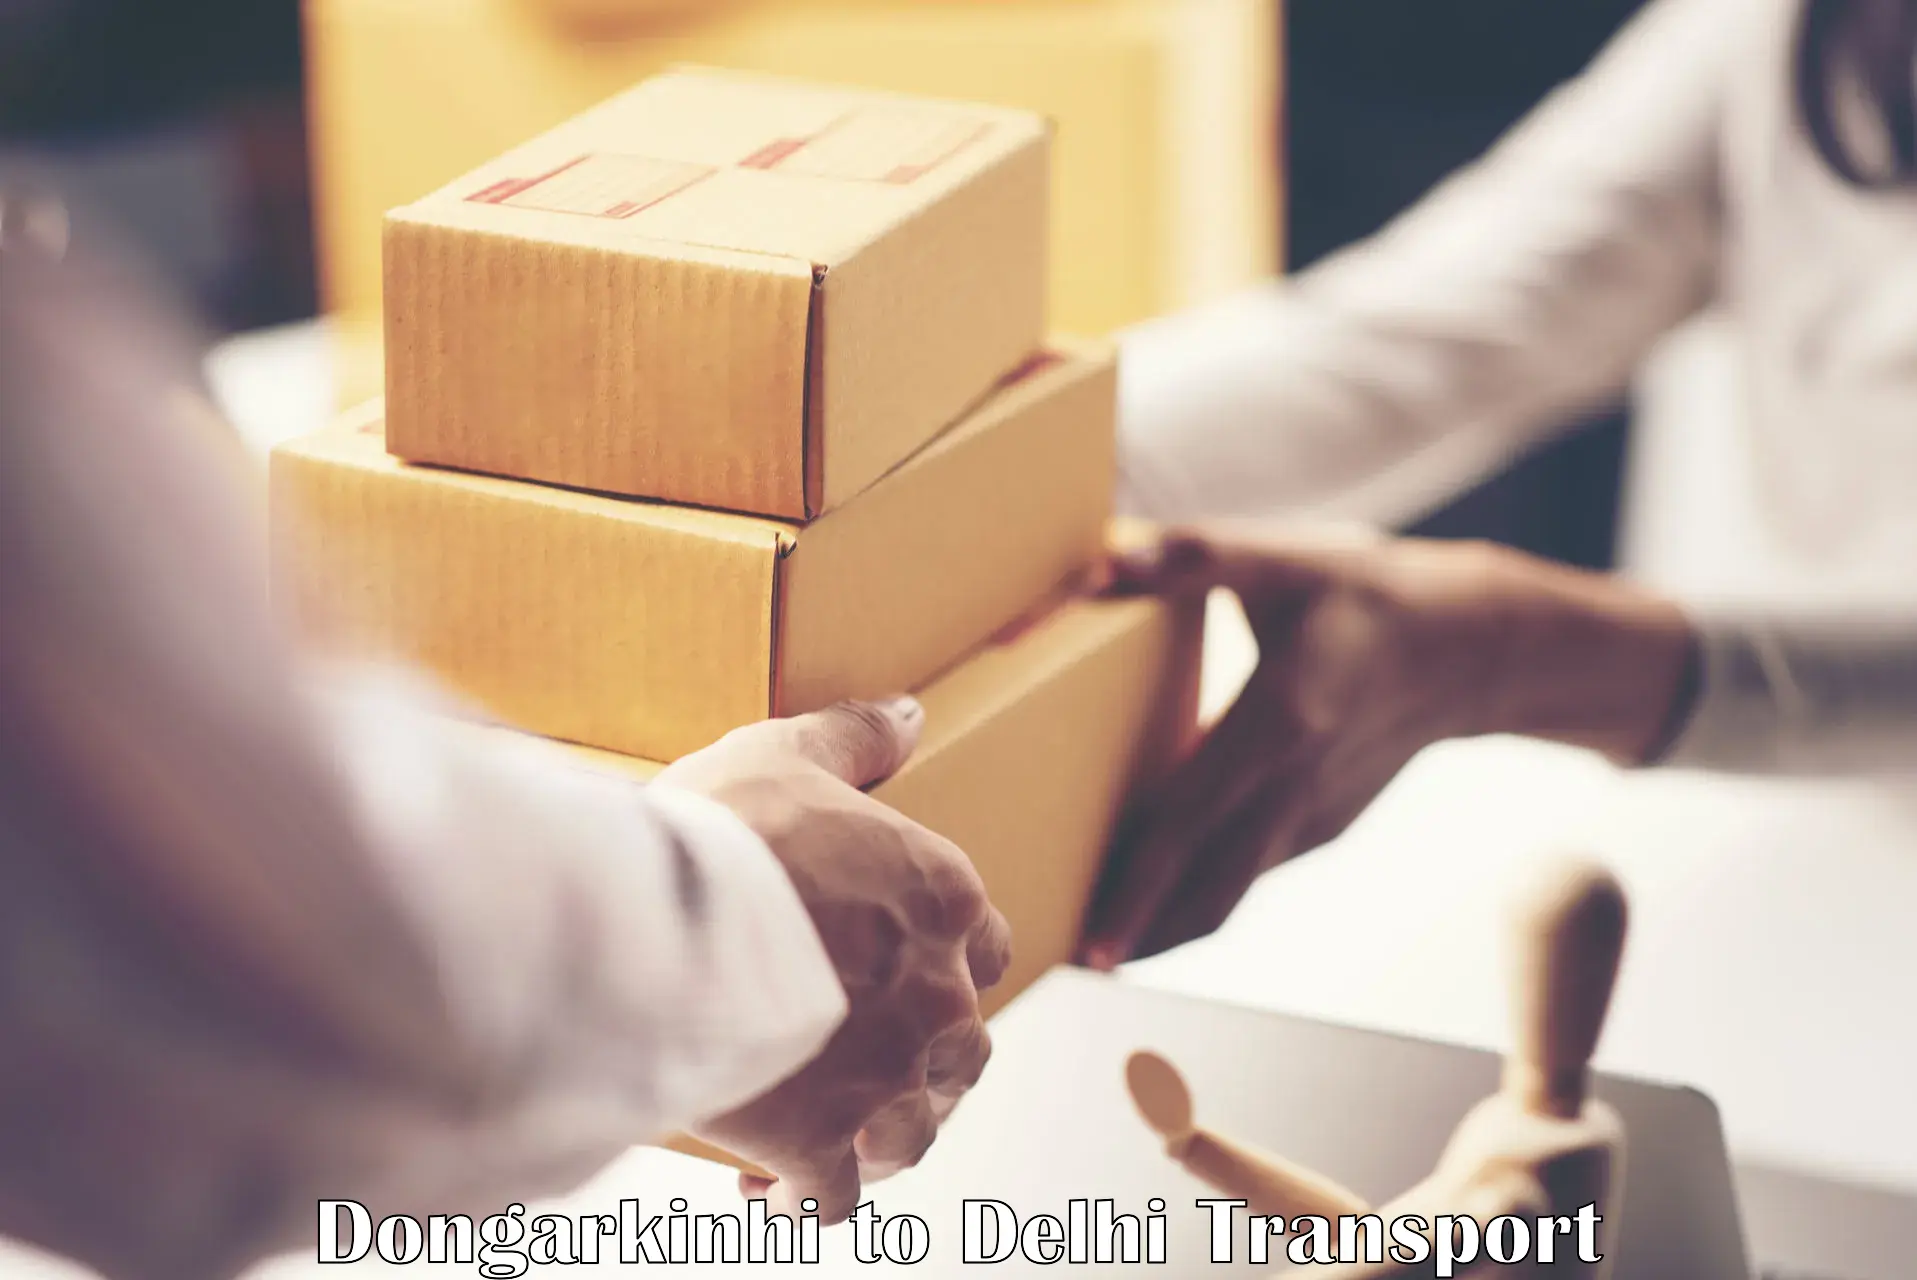 Container transport service Dongarkinhi to Delhi